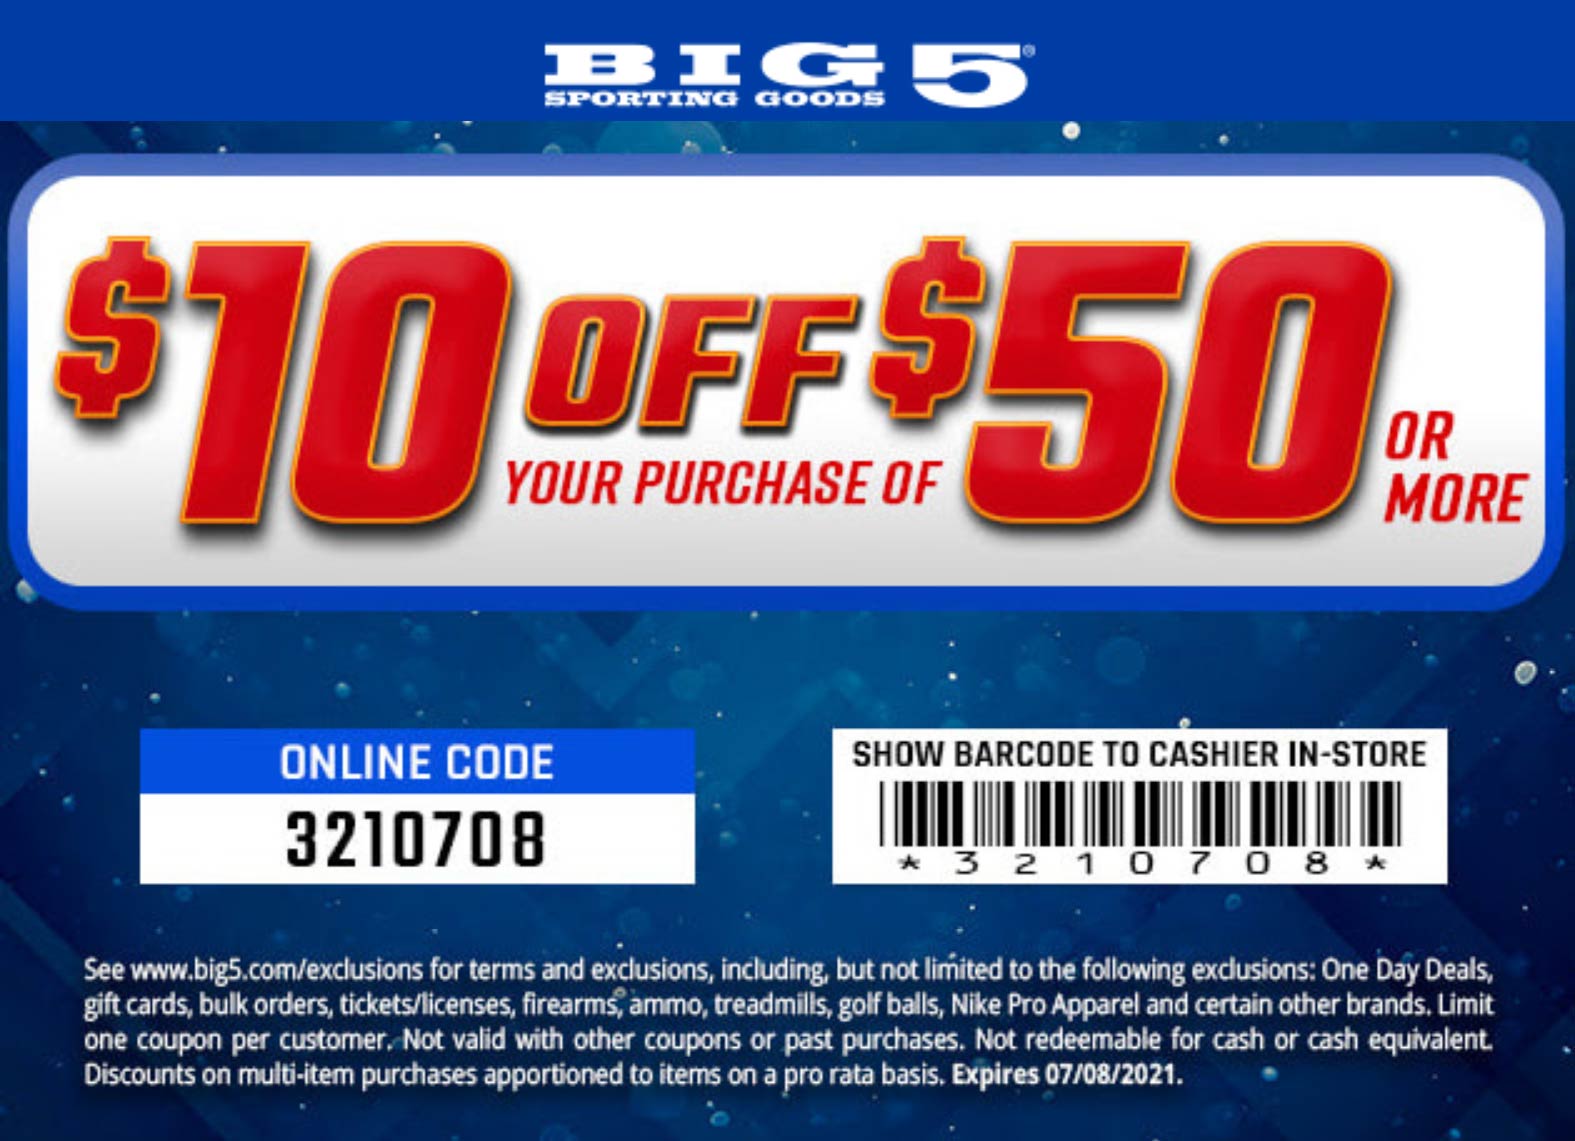 Big 5 stores Coupon  $10 off $50 today at Big 5 sporting goods, or online via promo code 3210708 #big5 